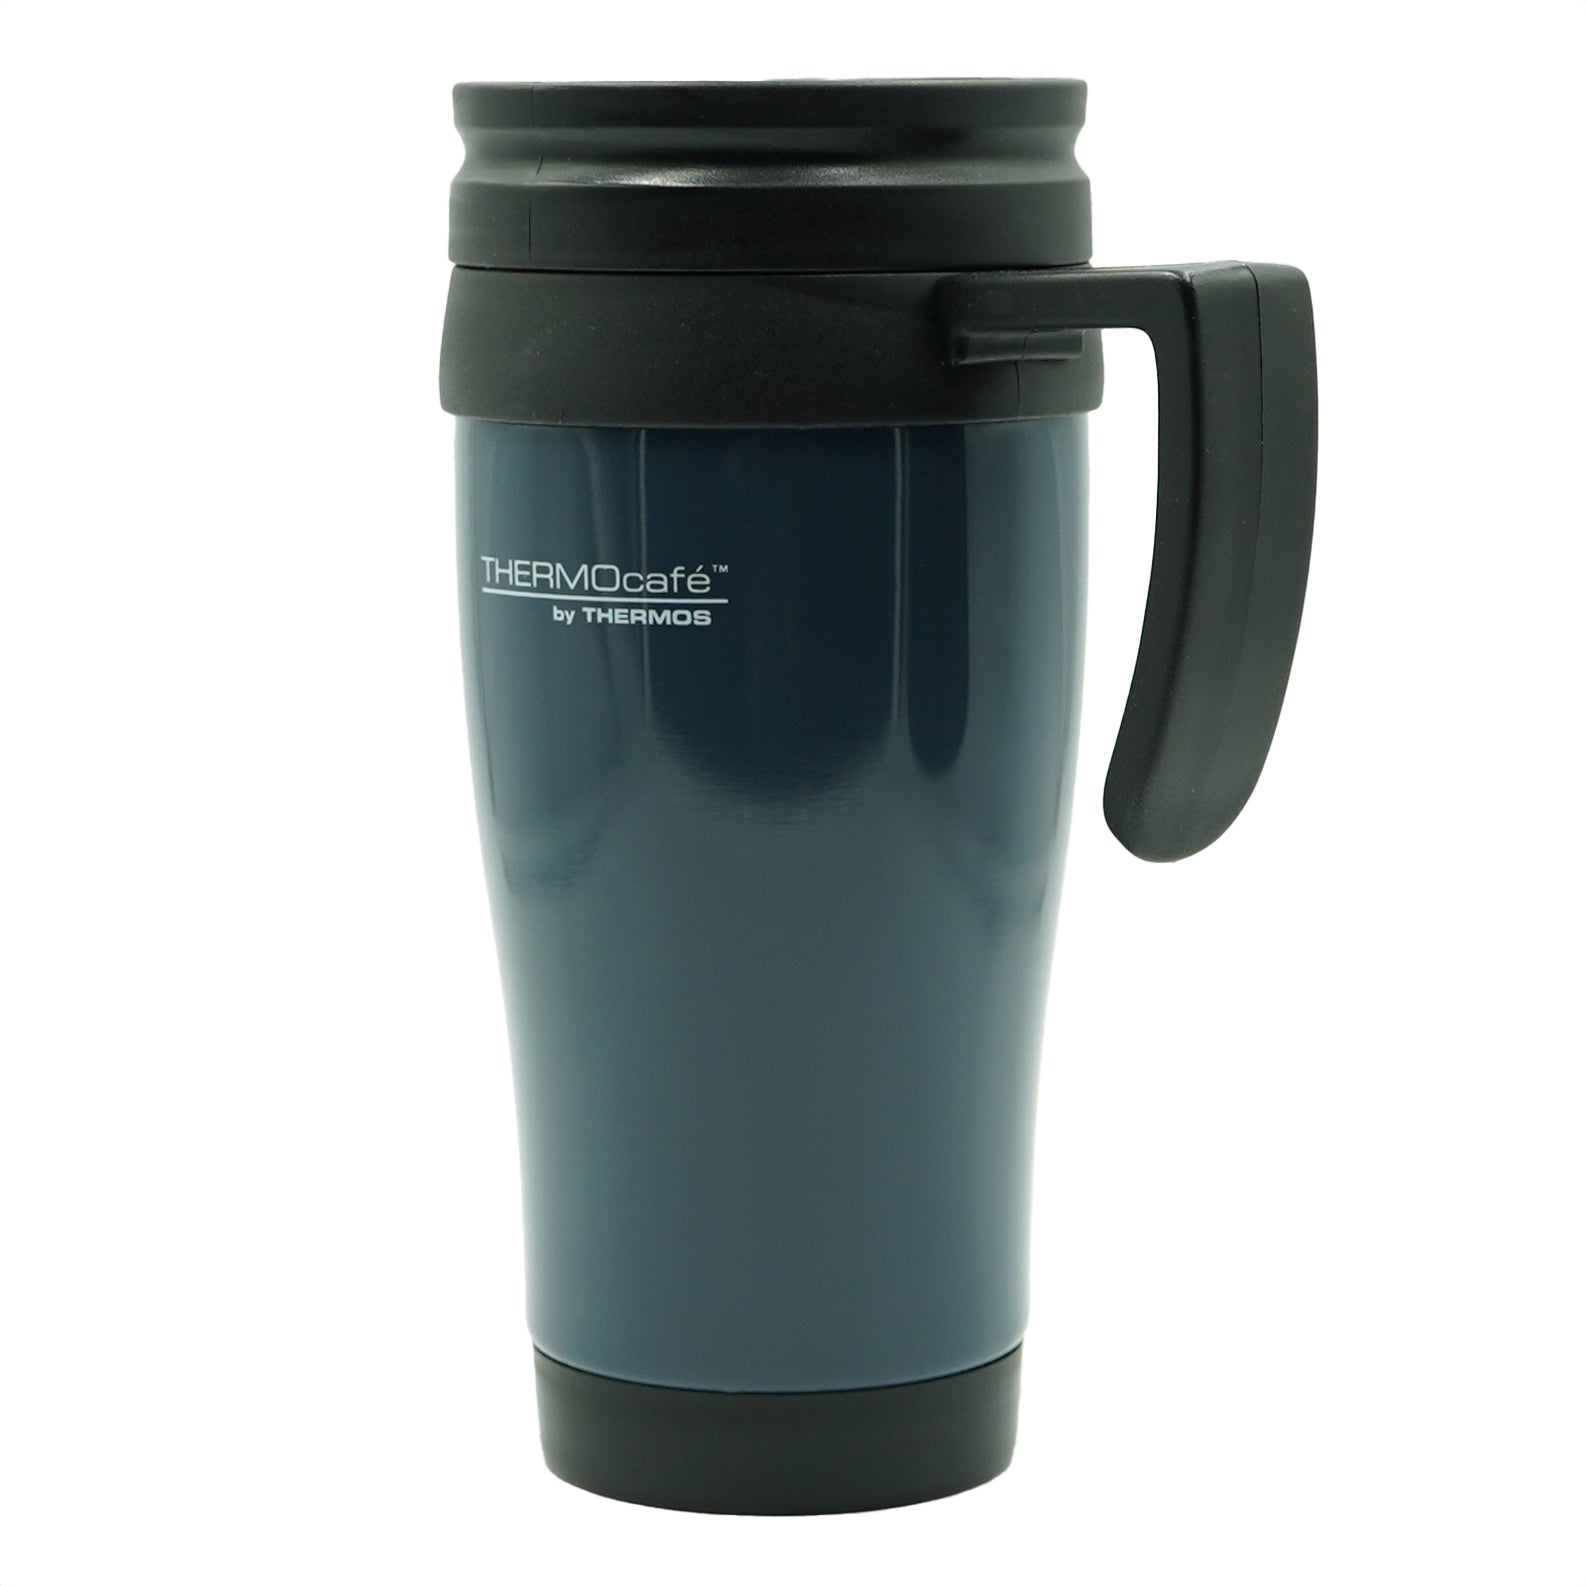 Thermos 14 oz. Foam Insulated Travel Mug - Charcoal/Navy Thermos